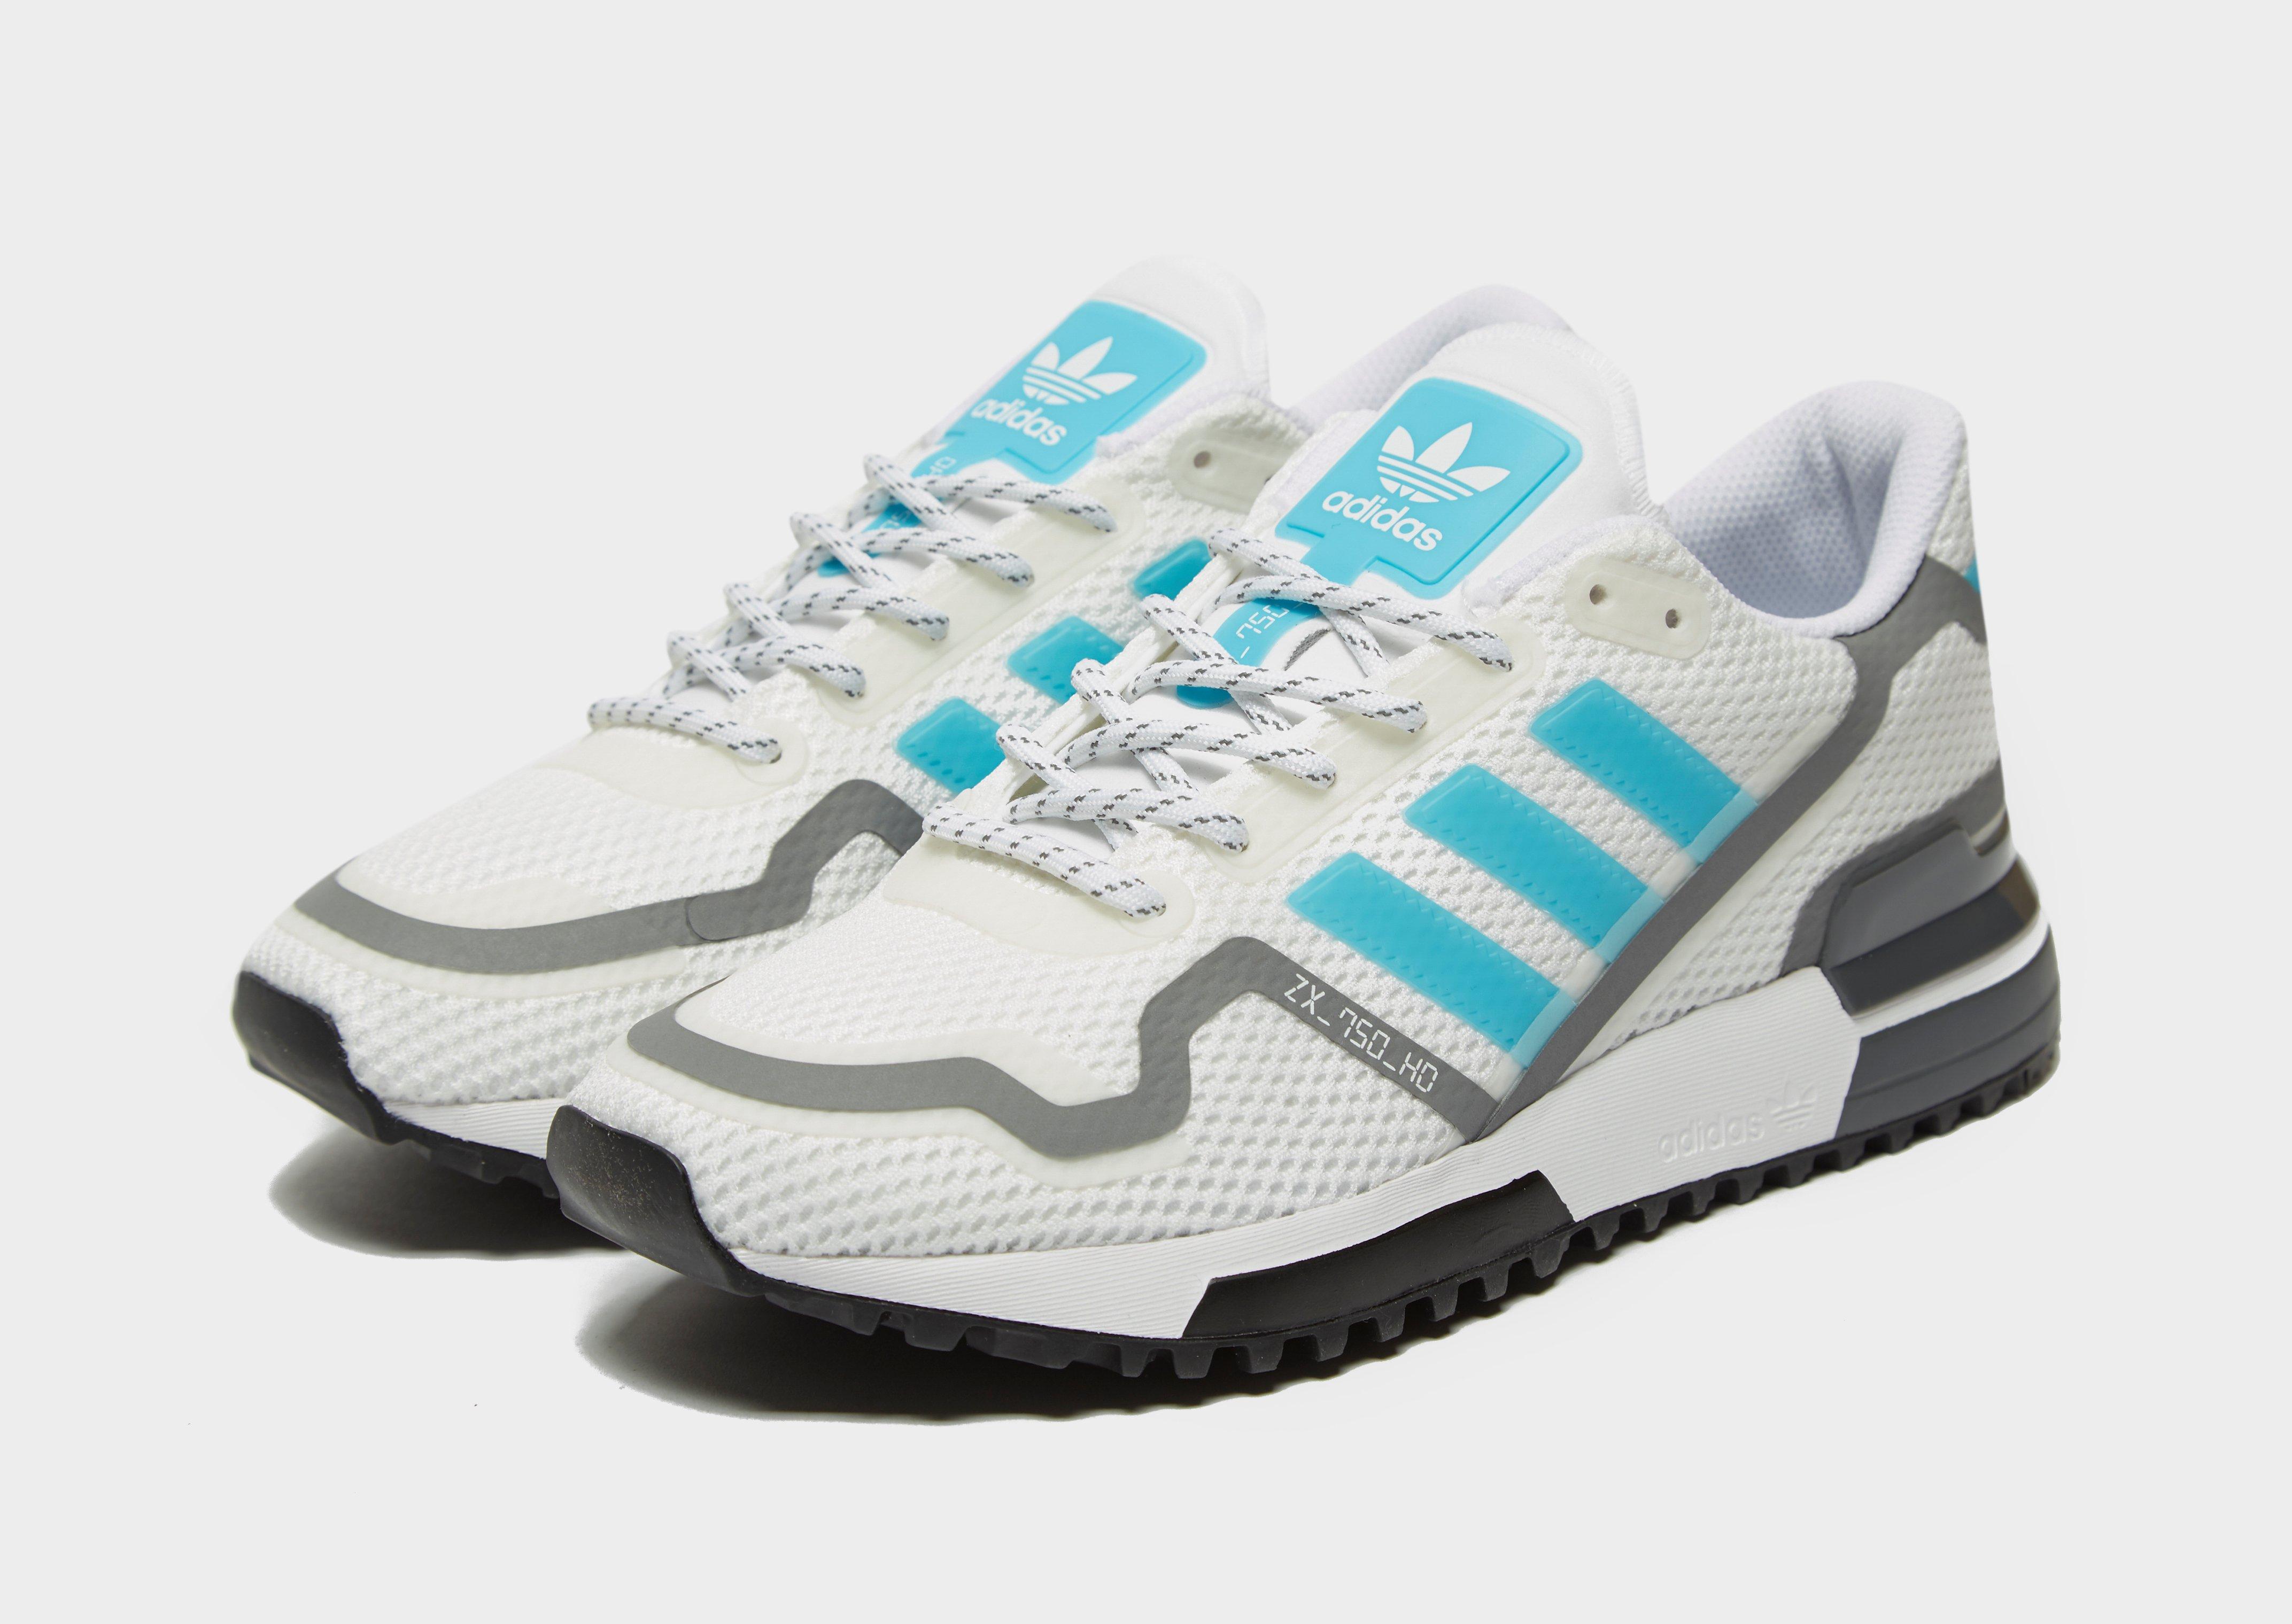 adidas zx 600 homme blanche